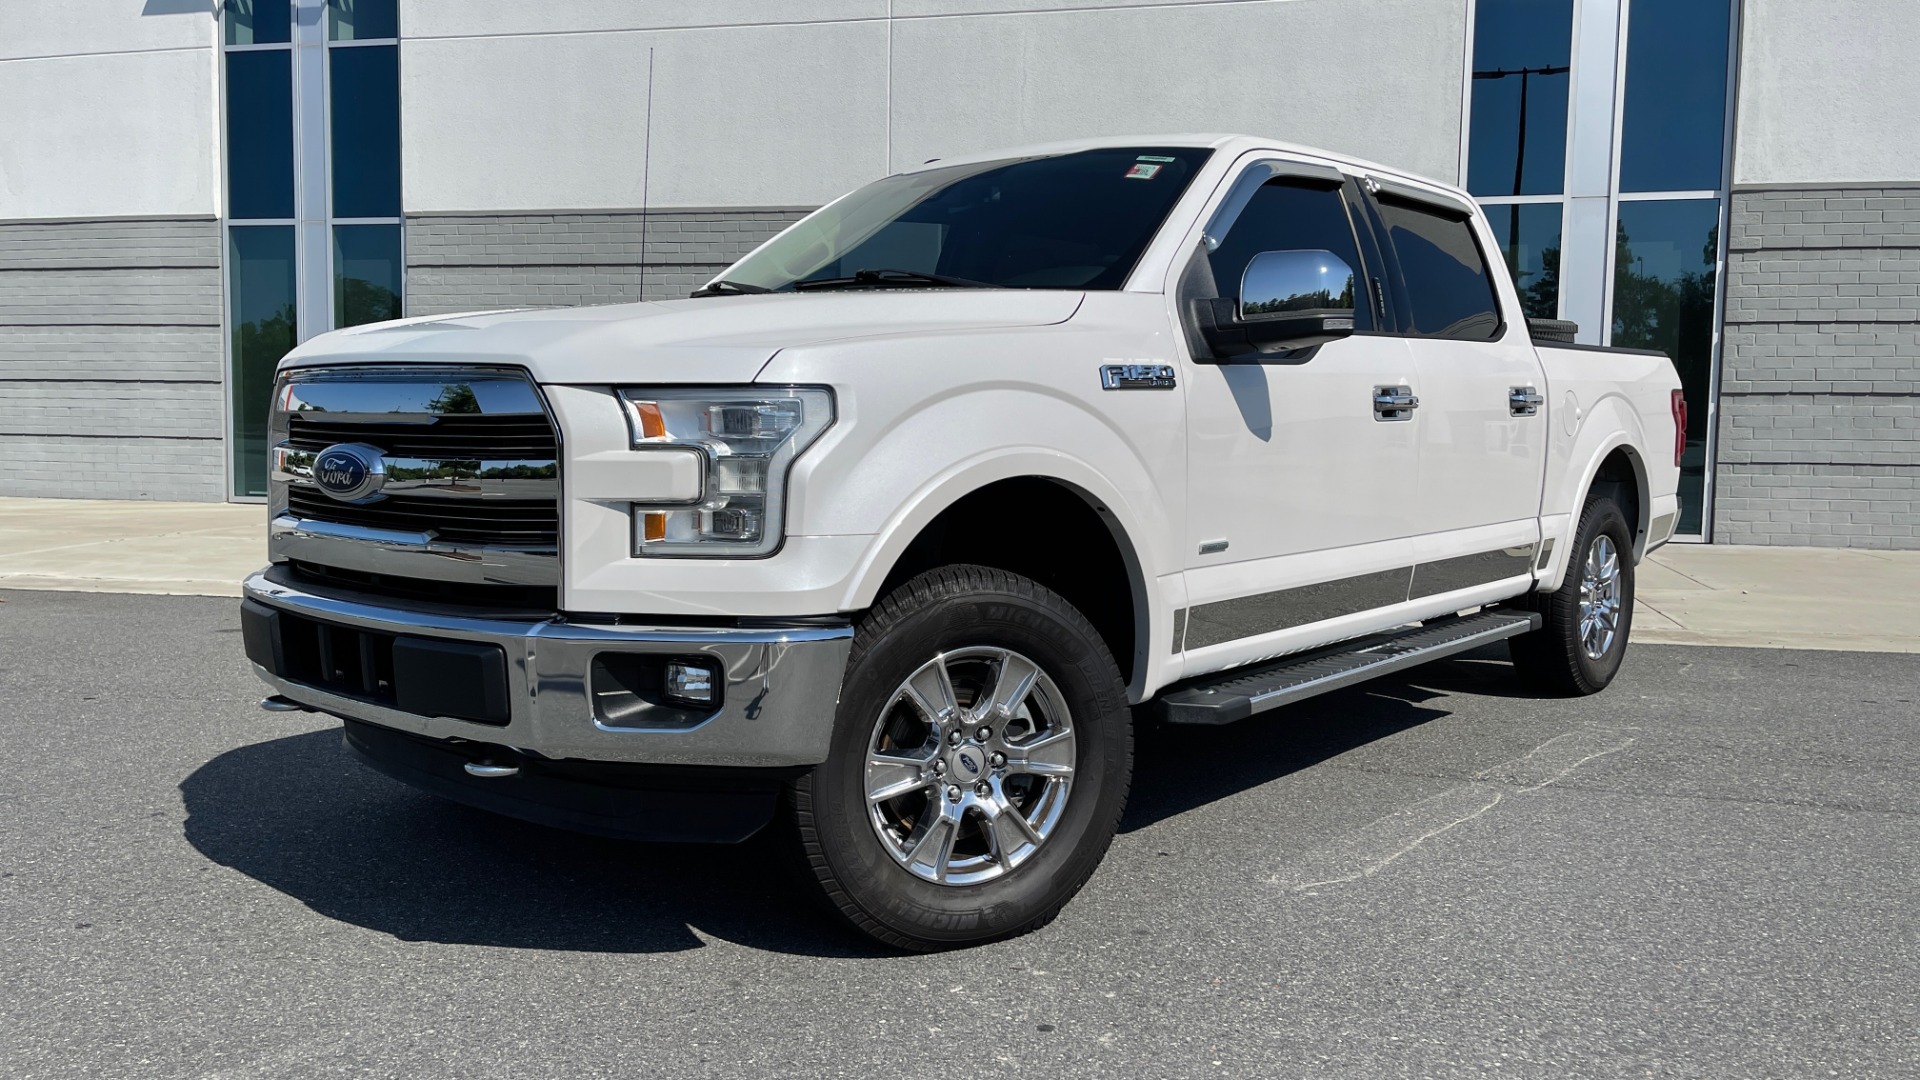 Used 2016 Ford F-150 LARIAT 4X4 / 3.5L V6 / 6-SPD AUTO / BLIS / SONY / NAV / REARVIEW for sale Sold at Formula Imports in Charlotte NC 28227 1